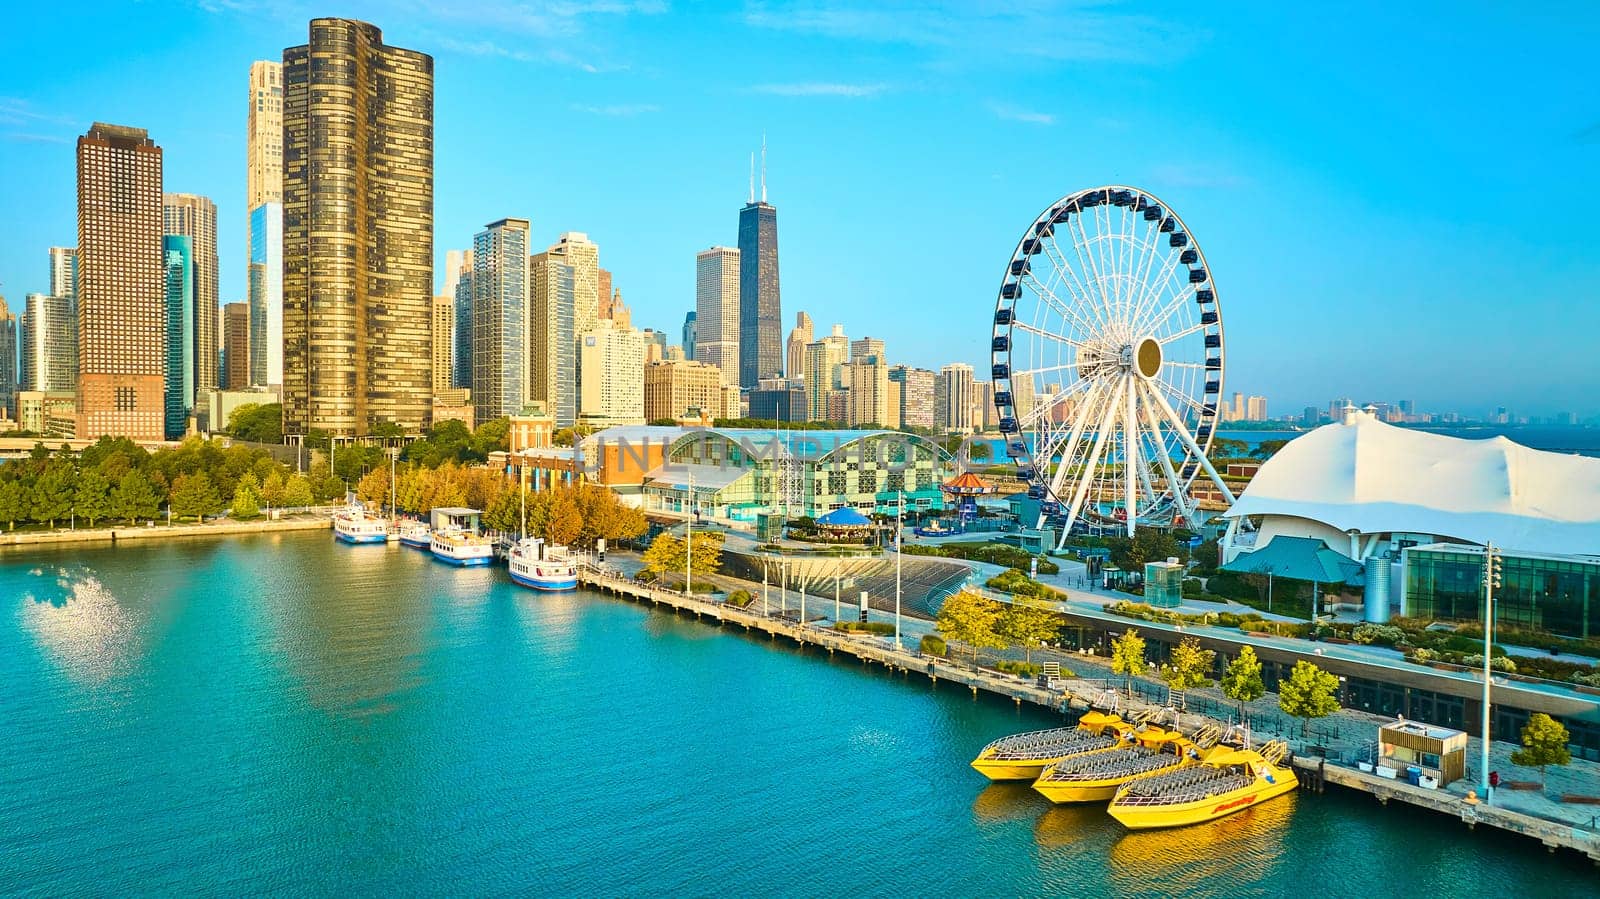 Aerial Centennial Wheel on Navy Pier with Chicago, IL skyscrapers in summer at dawn by njproductions